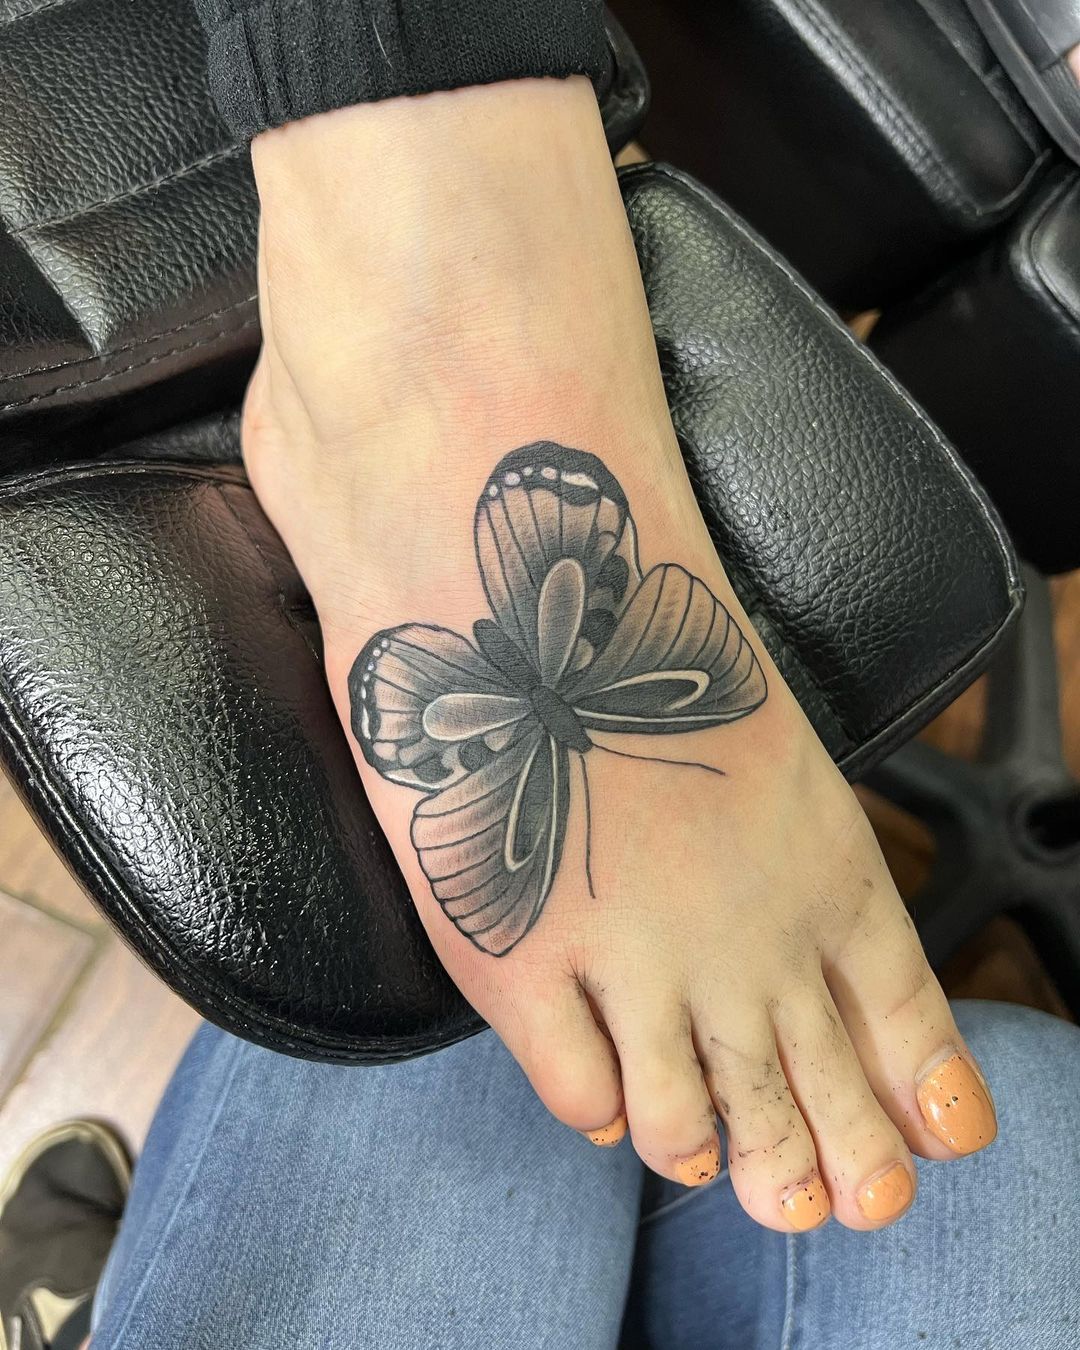 30+ Best Butterfly Tattoos Design You’ll Love To Get Next. Butterfly Tattoos on foot